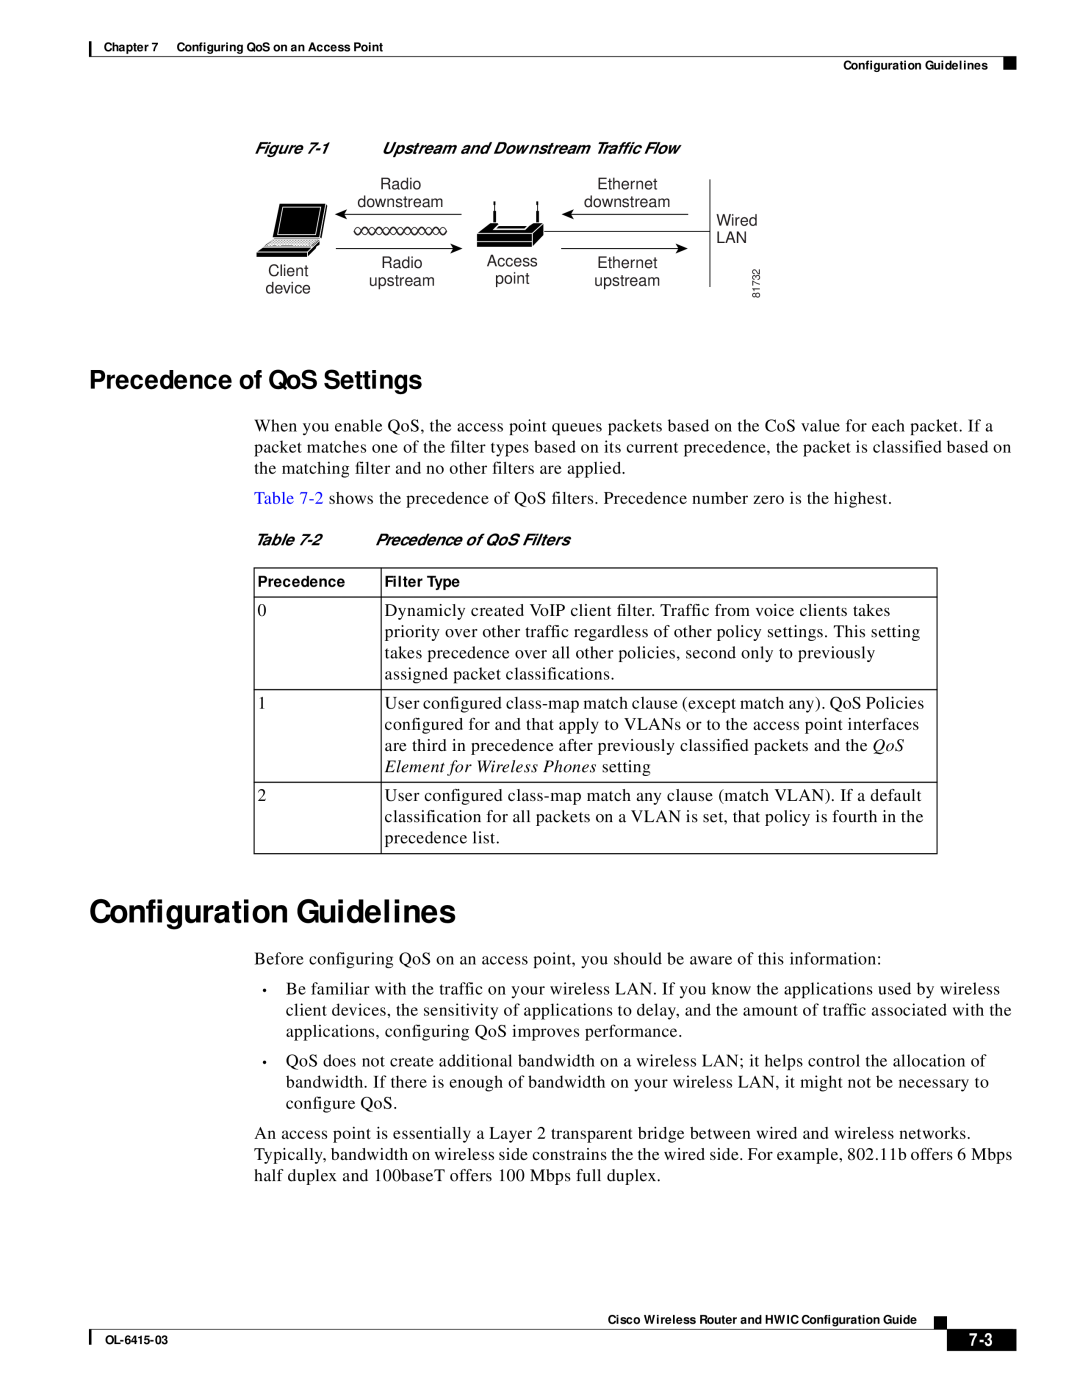 3D Connexion OL-6415-03 manual Configuration Guidelines, Precedence of QoS Settings, Filter Type 